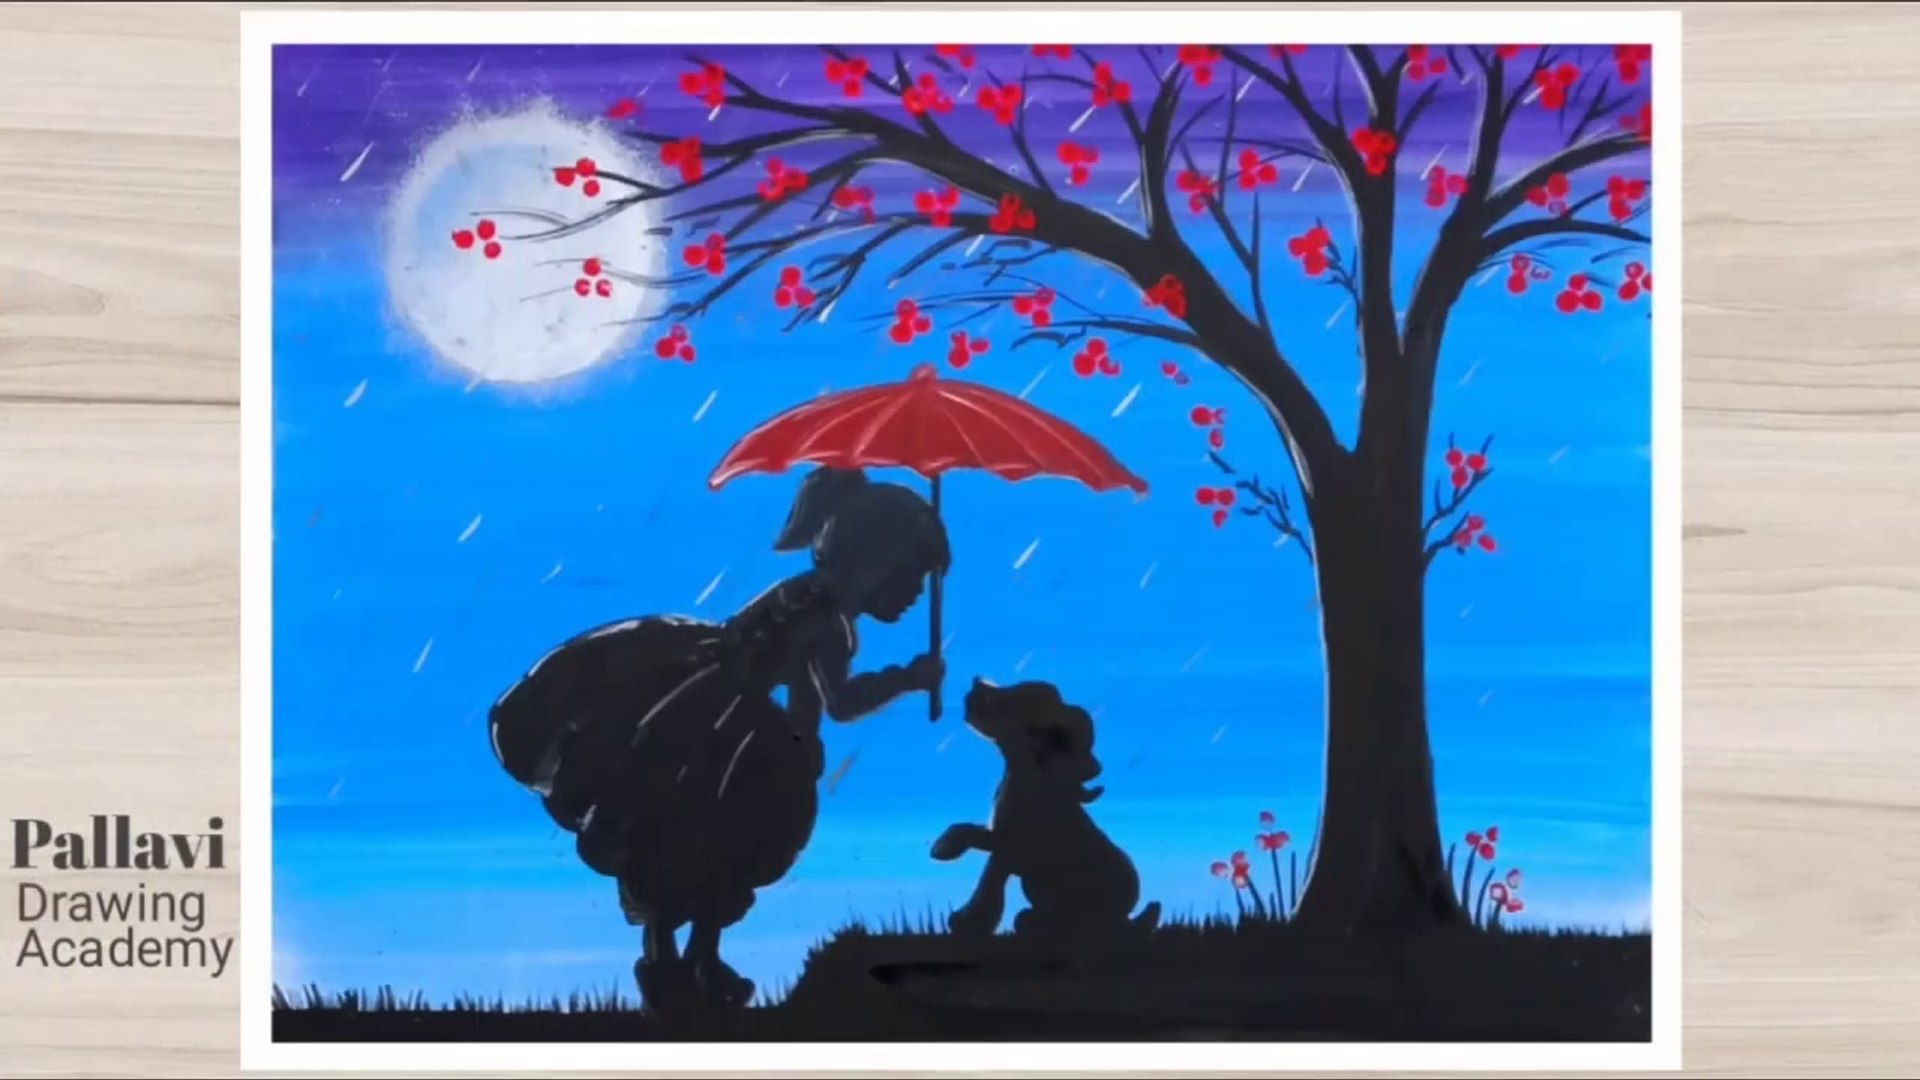 How to draw easy night painting for kids with poster colour, Pallavi  Drawing Academy